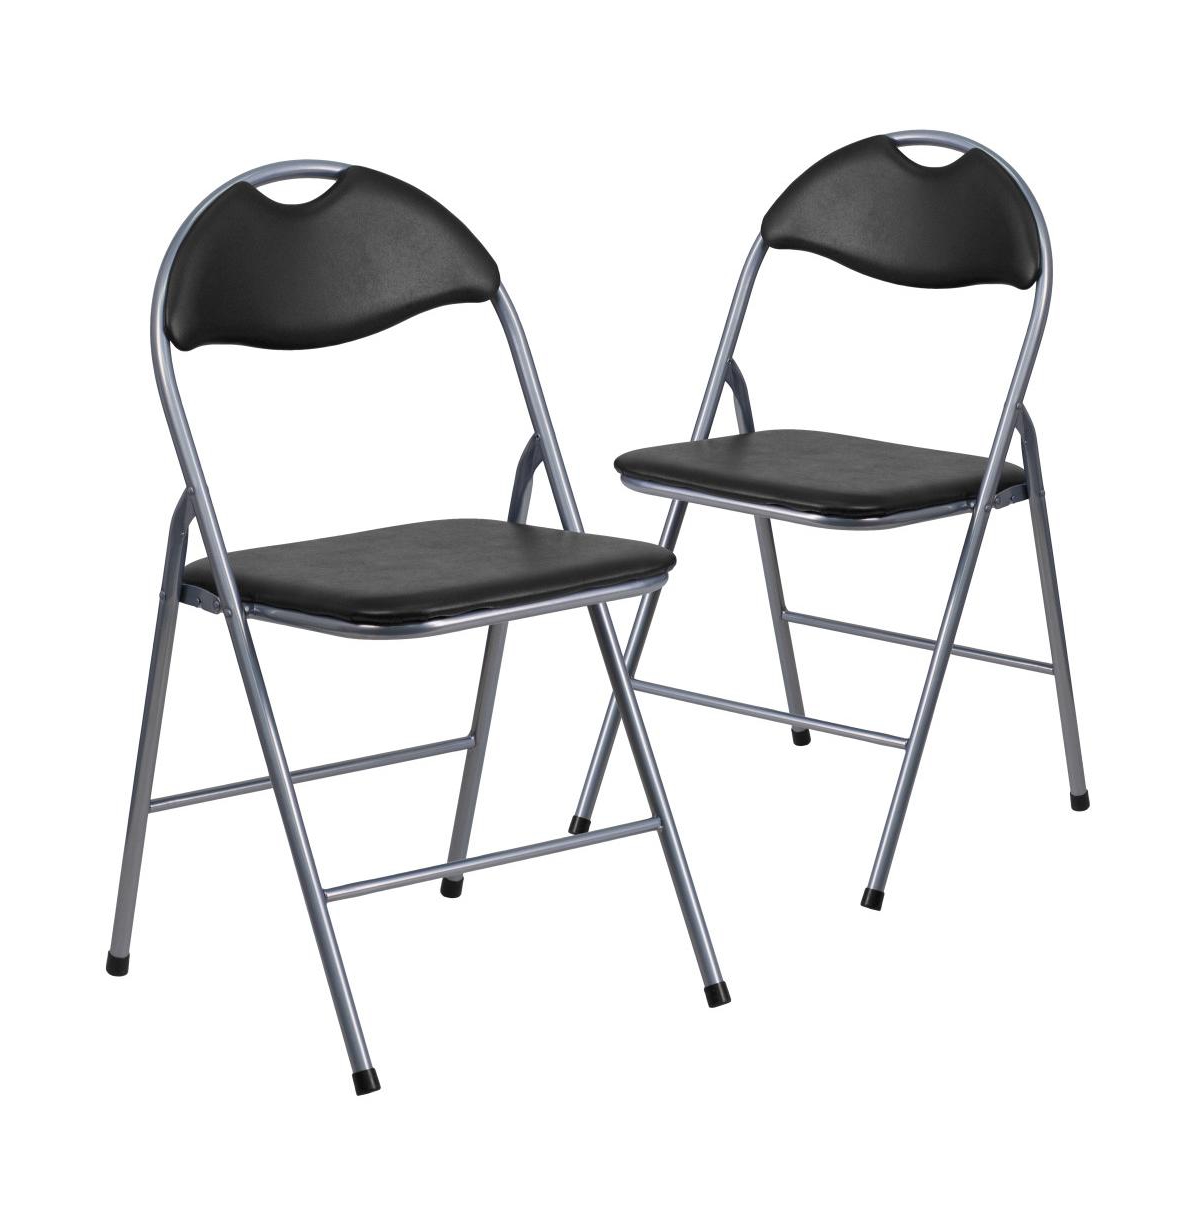 Emma+oliver 2 Pack Vinyl Metal Folding Chair With Carrying Handle In Black